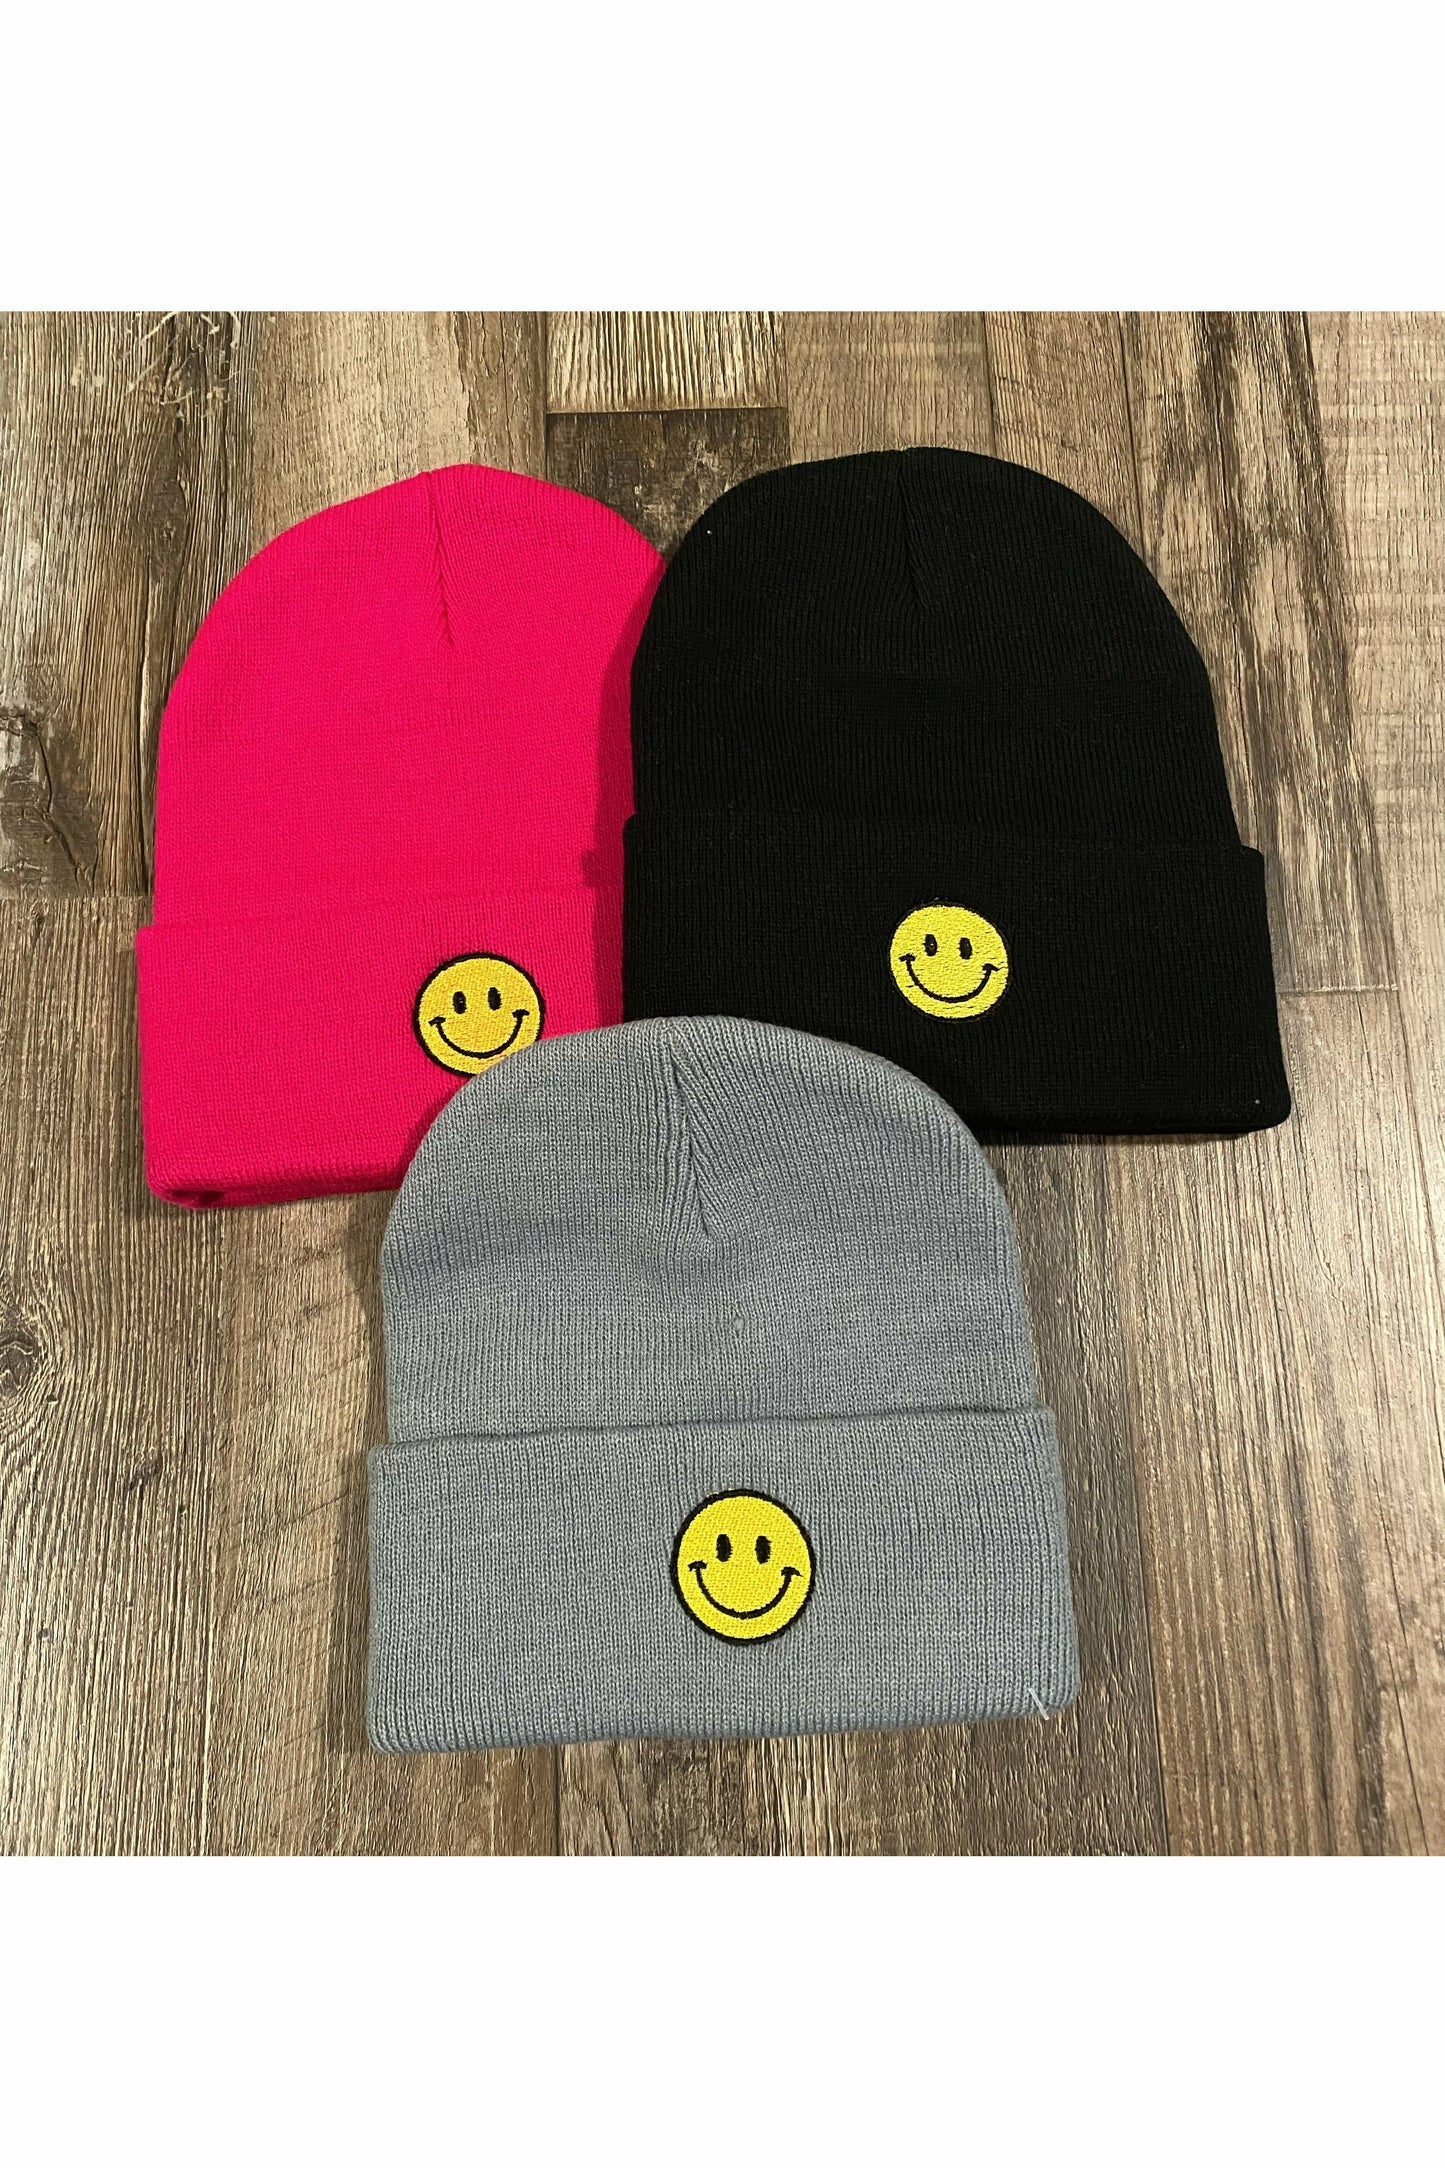 Embroidered Smiley Face Beanies